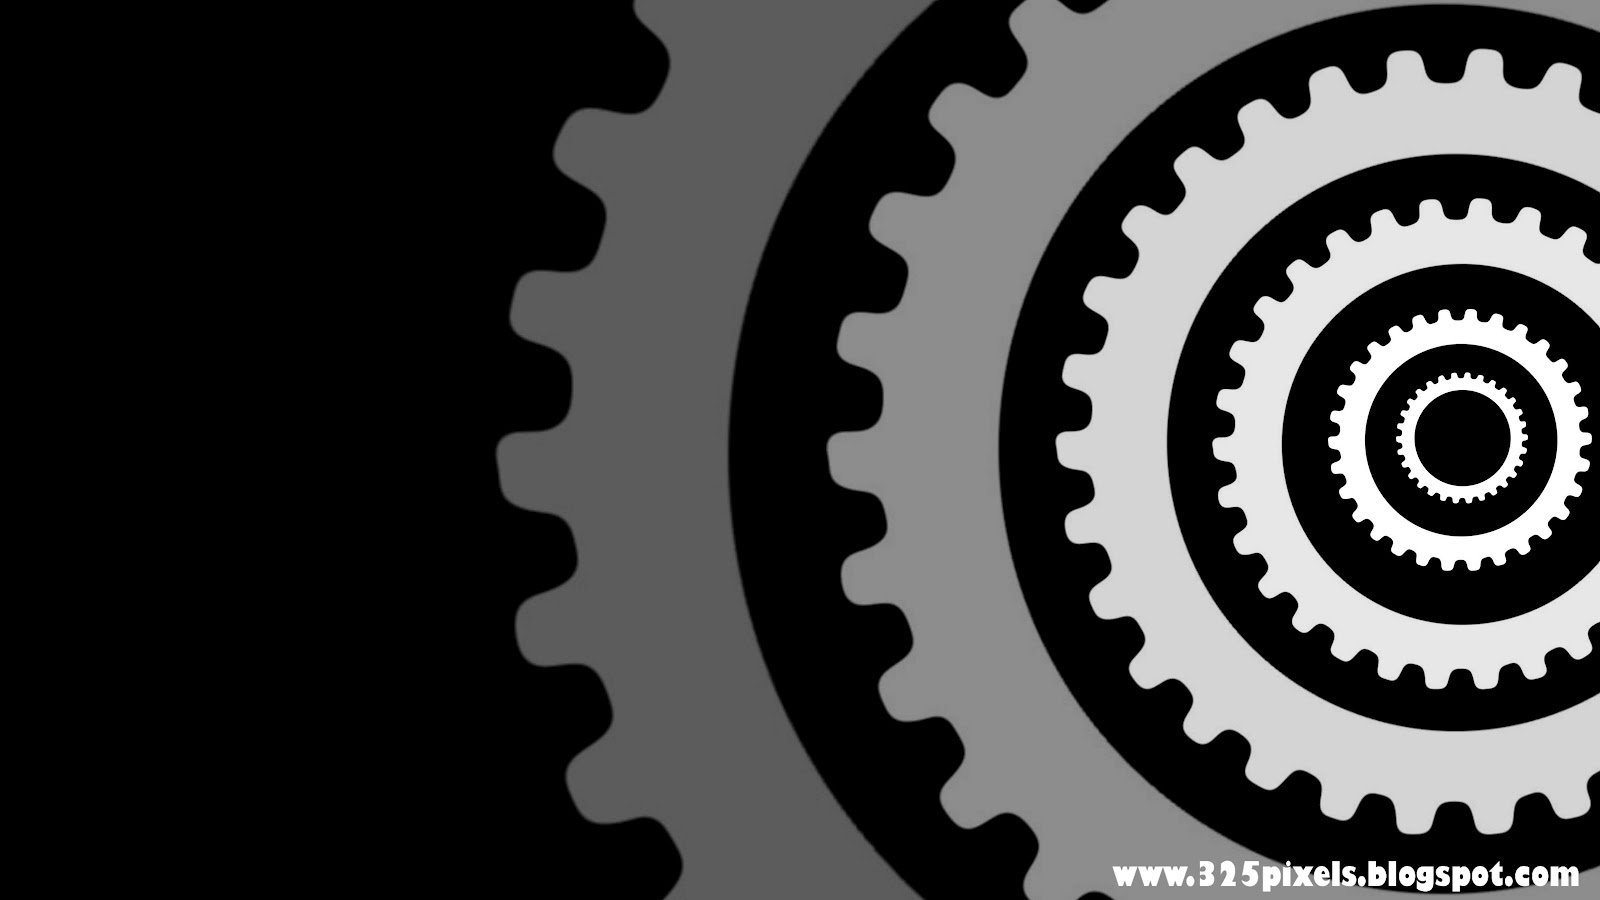 Pixels HD Wallpaper And Image Cool Looking Gears